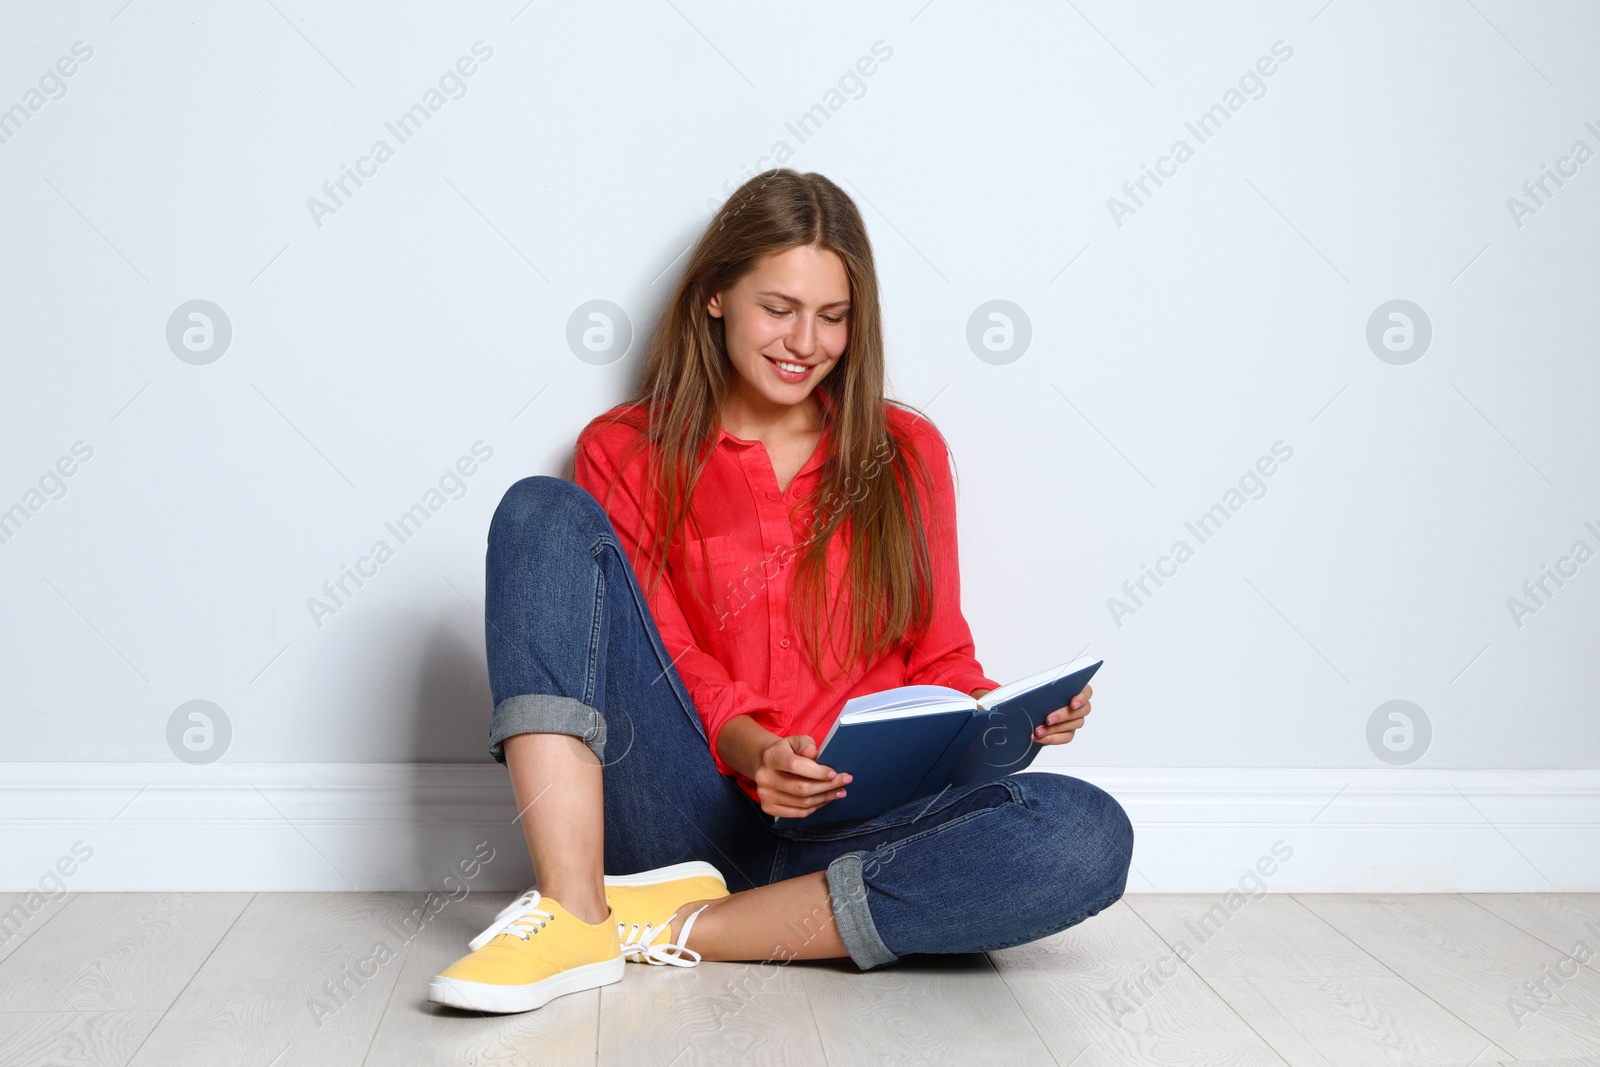 Photo of Beautiful young woman reading book on wooden floor near light wall